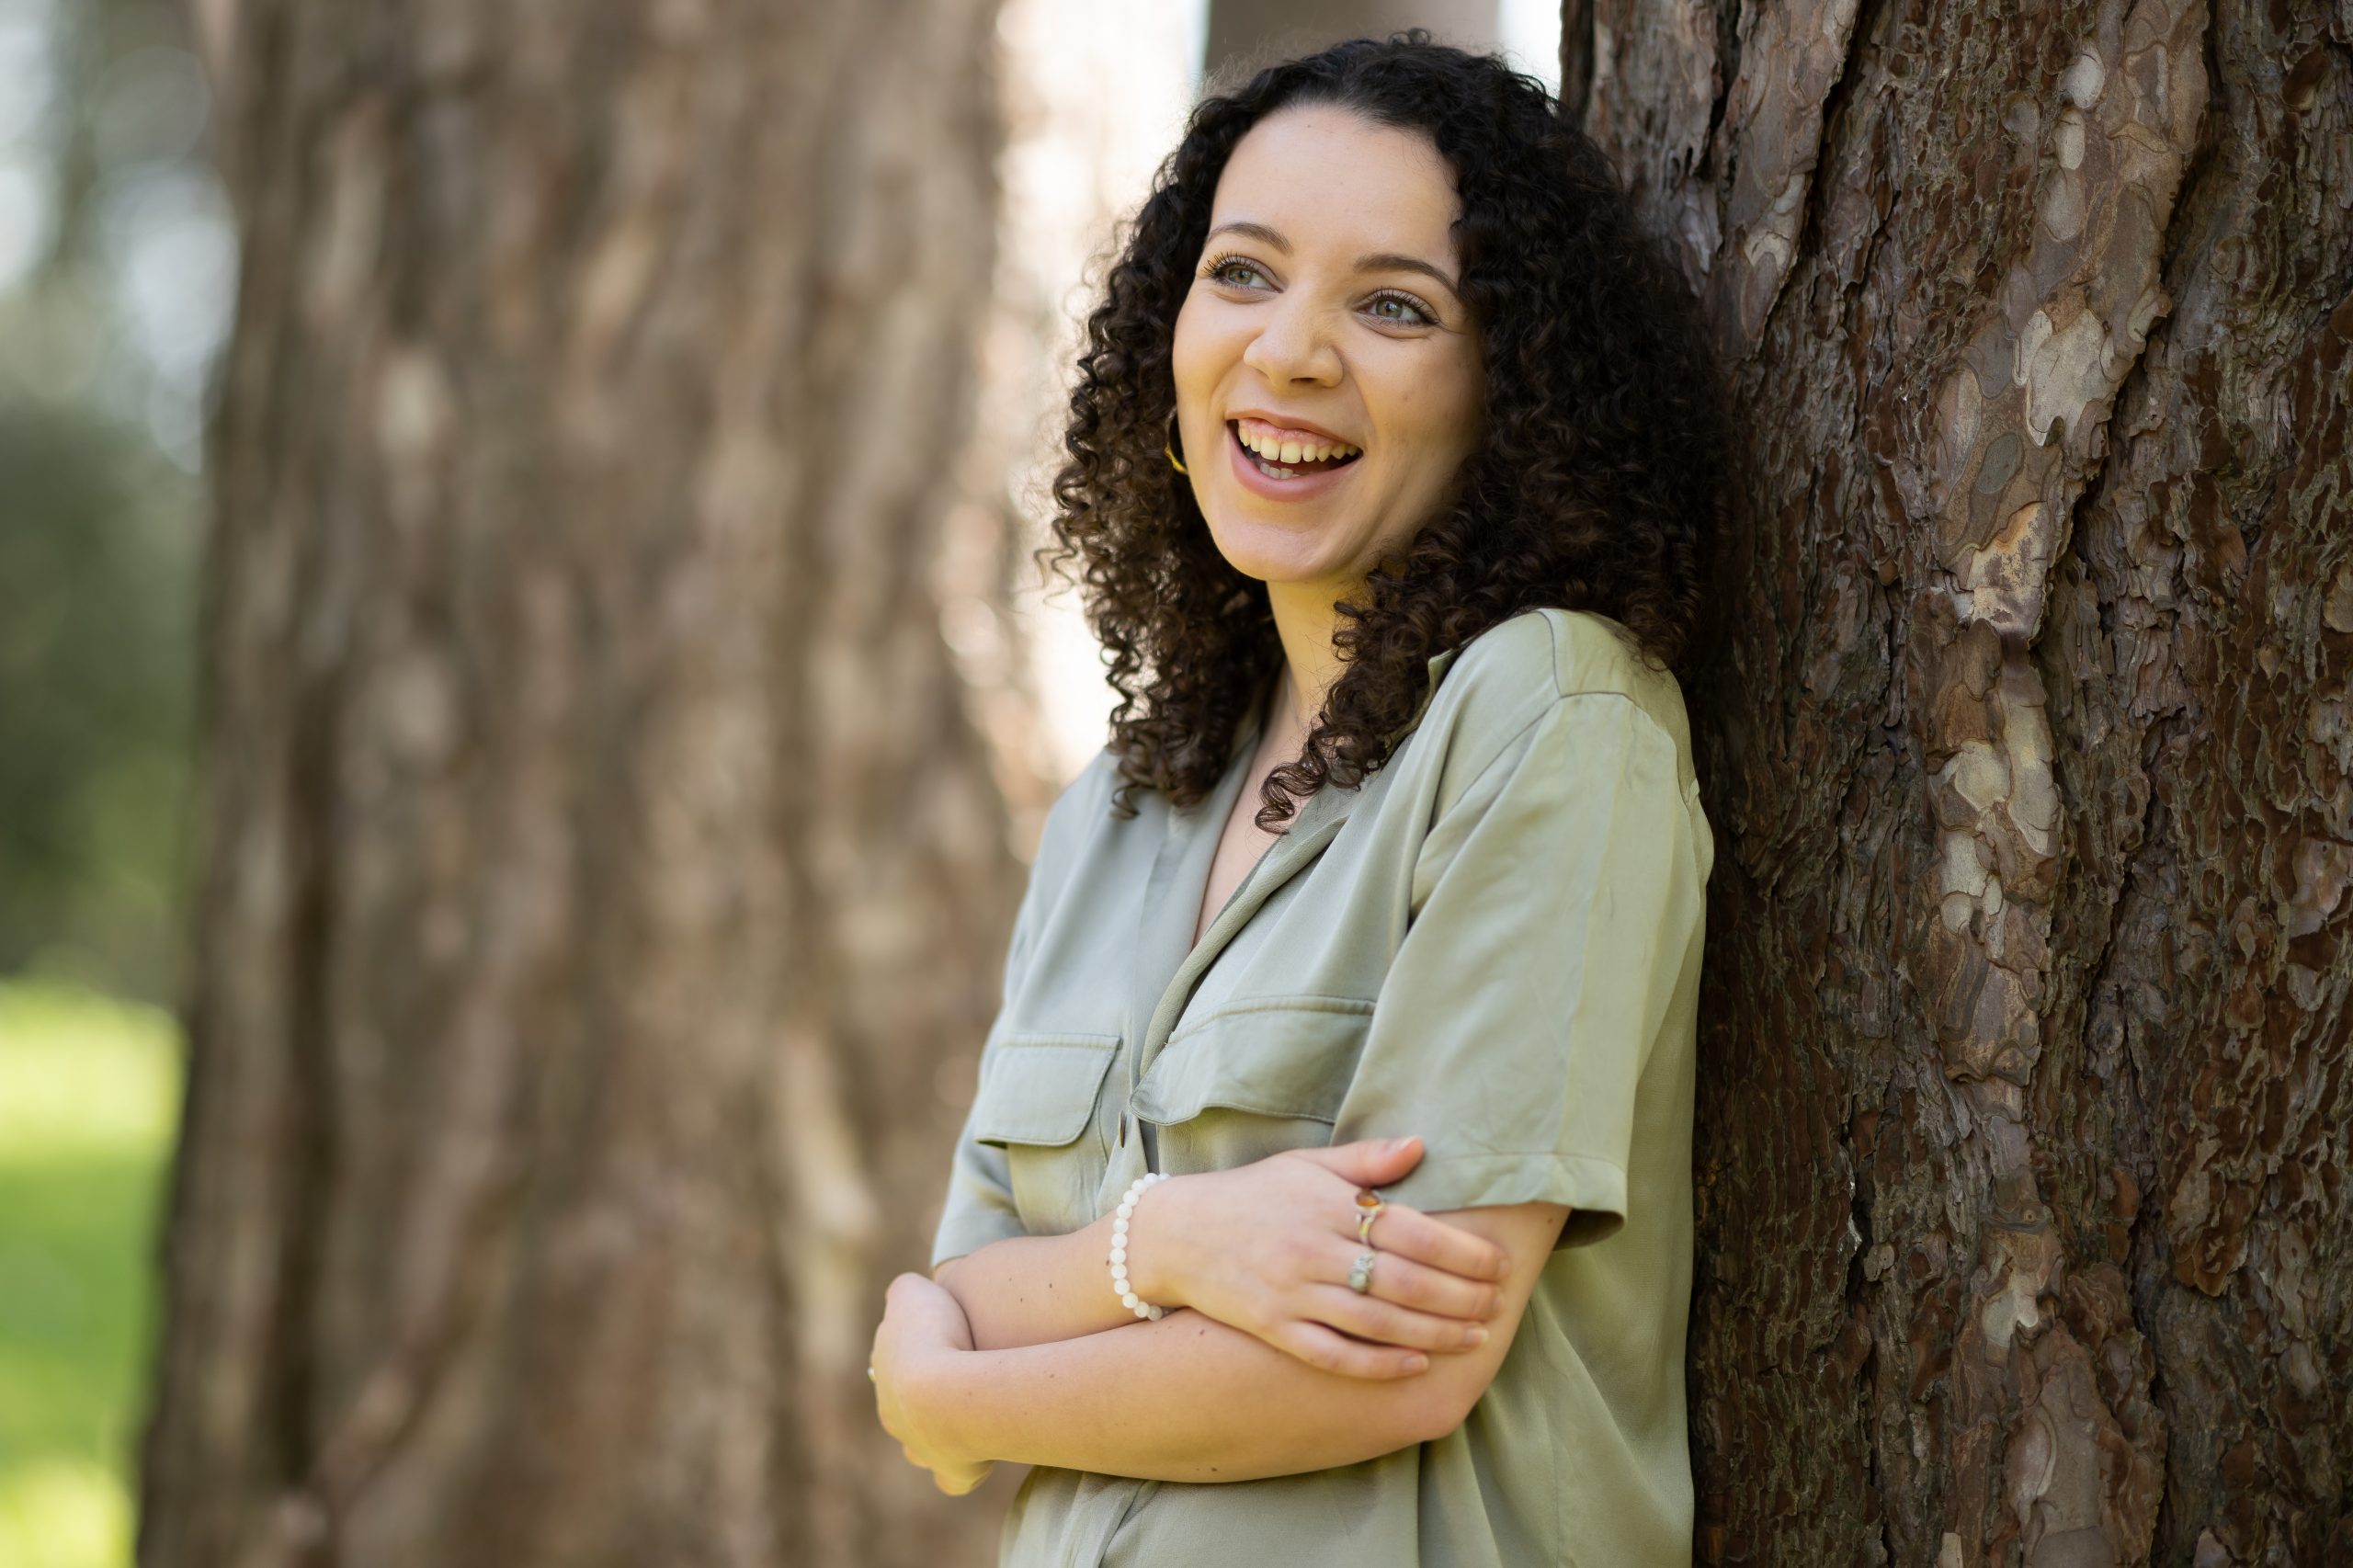 A woman, wearing a light green shirt, leans against a tree.